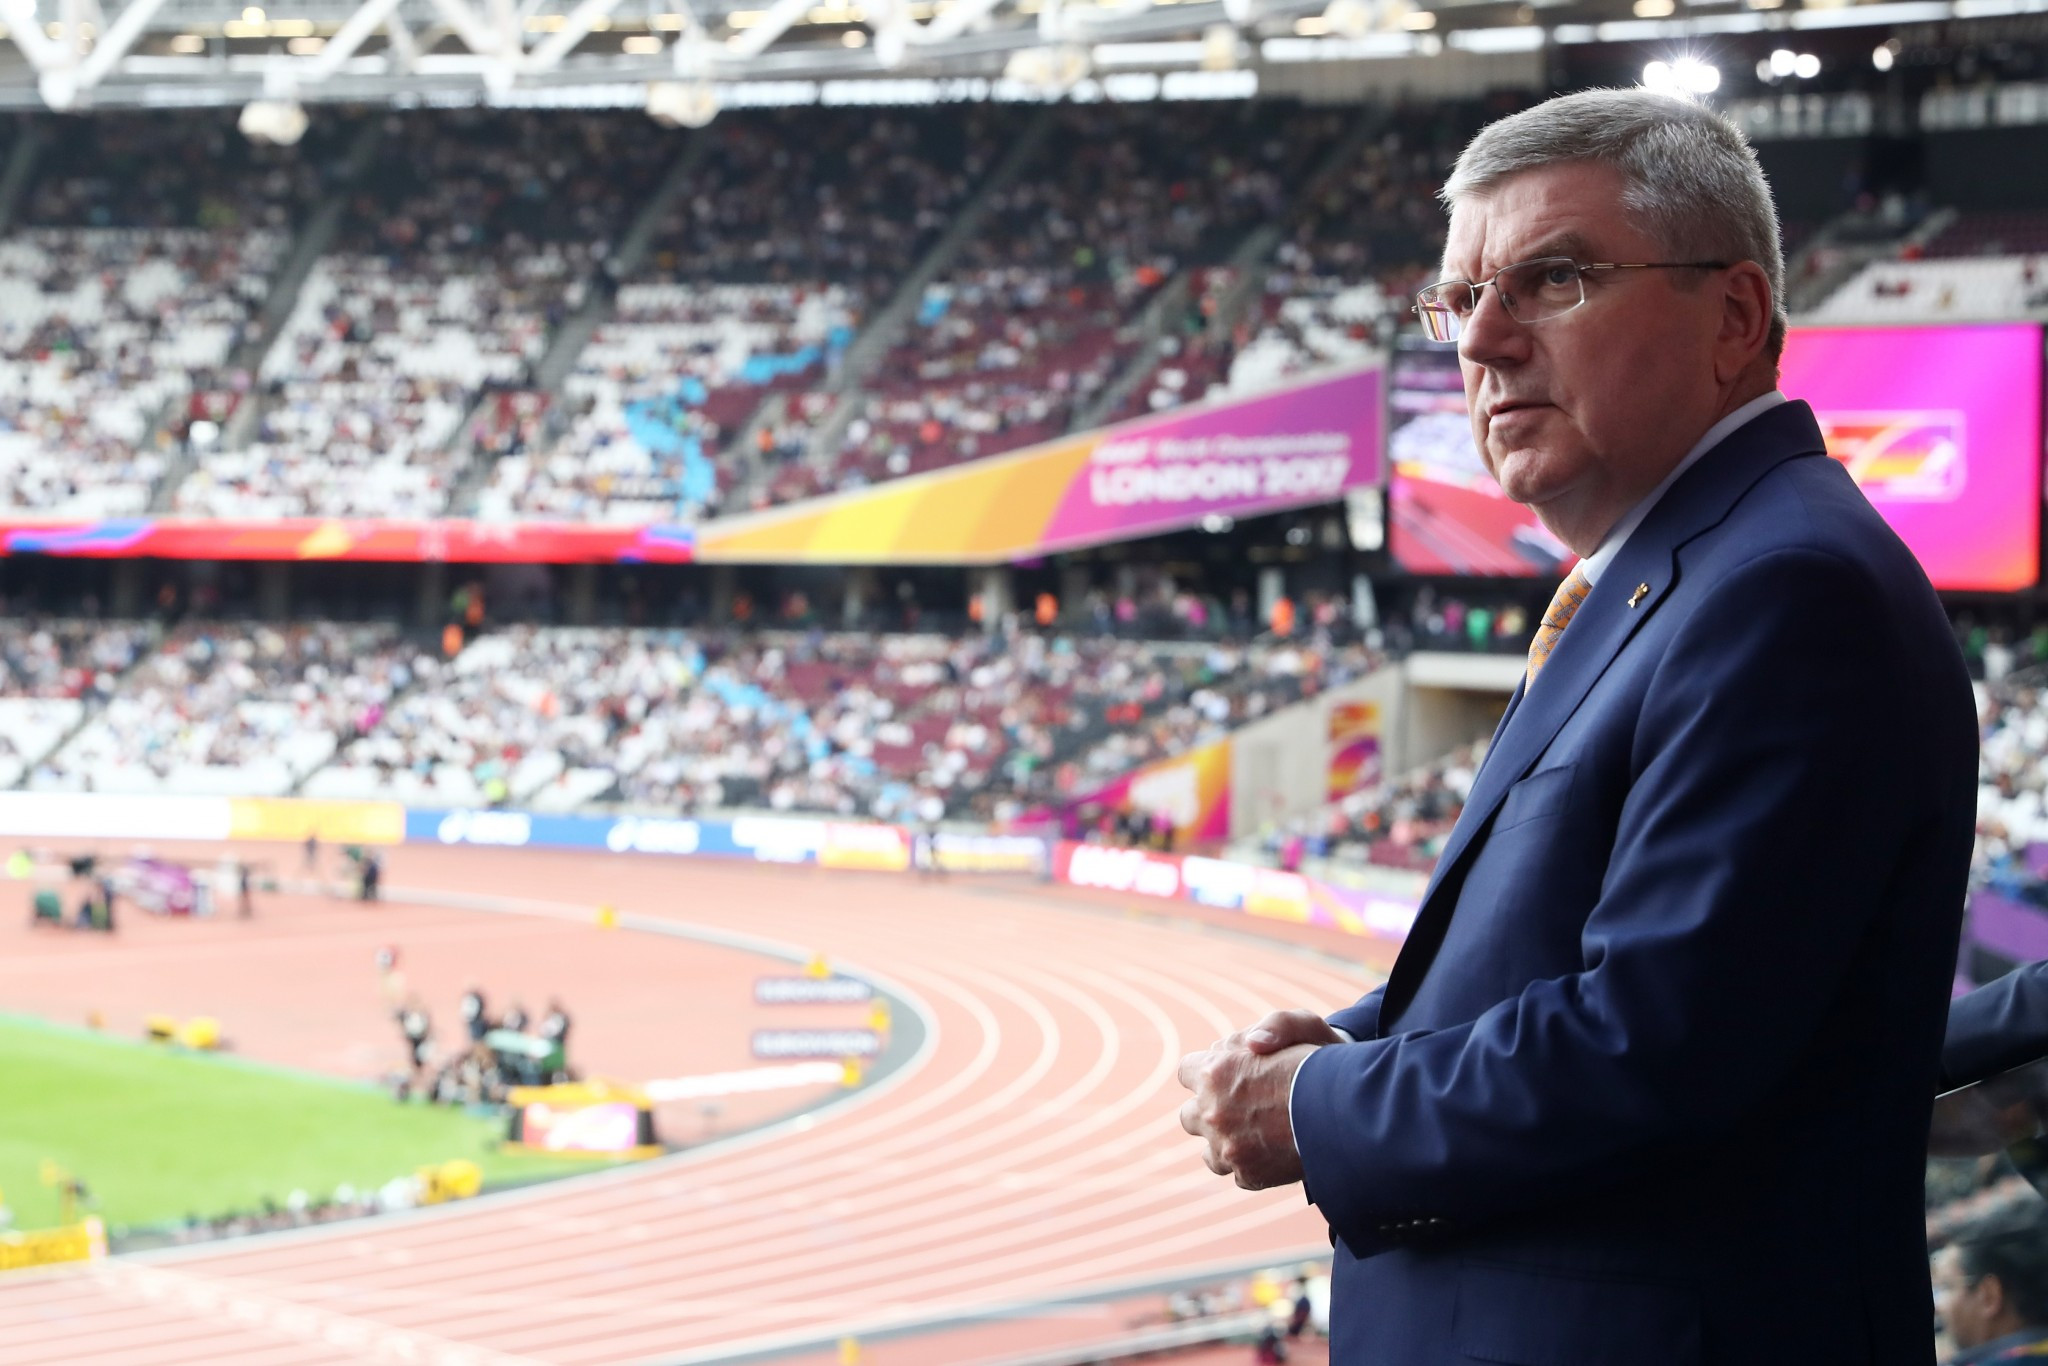 IOC President Thomas Bach will not attend the World Wrestling Championships in Paris ©Getty Images